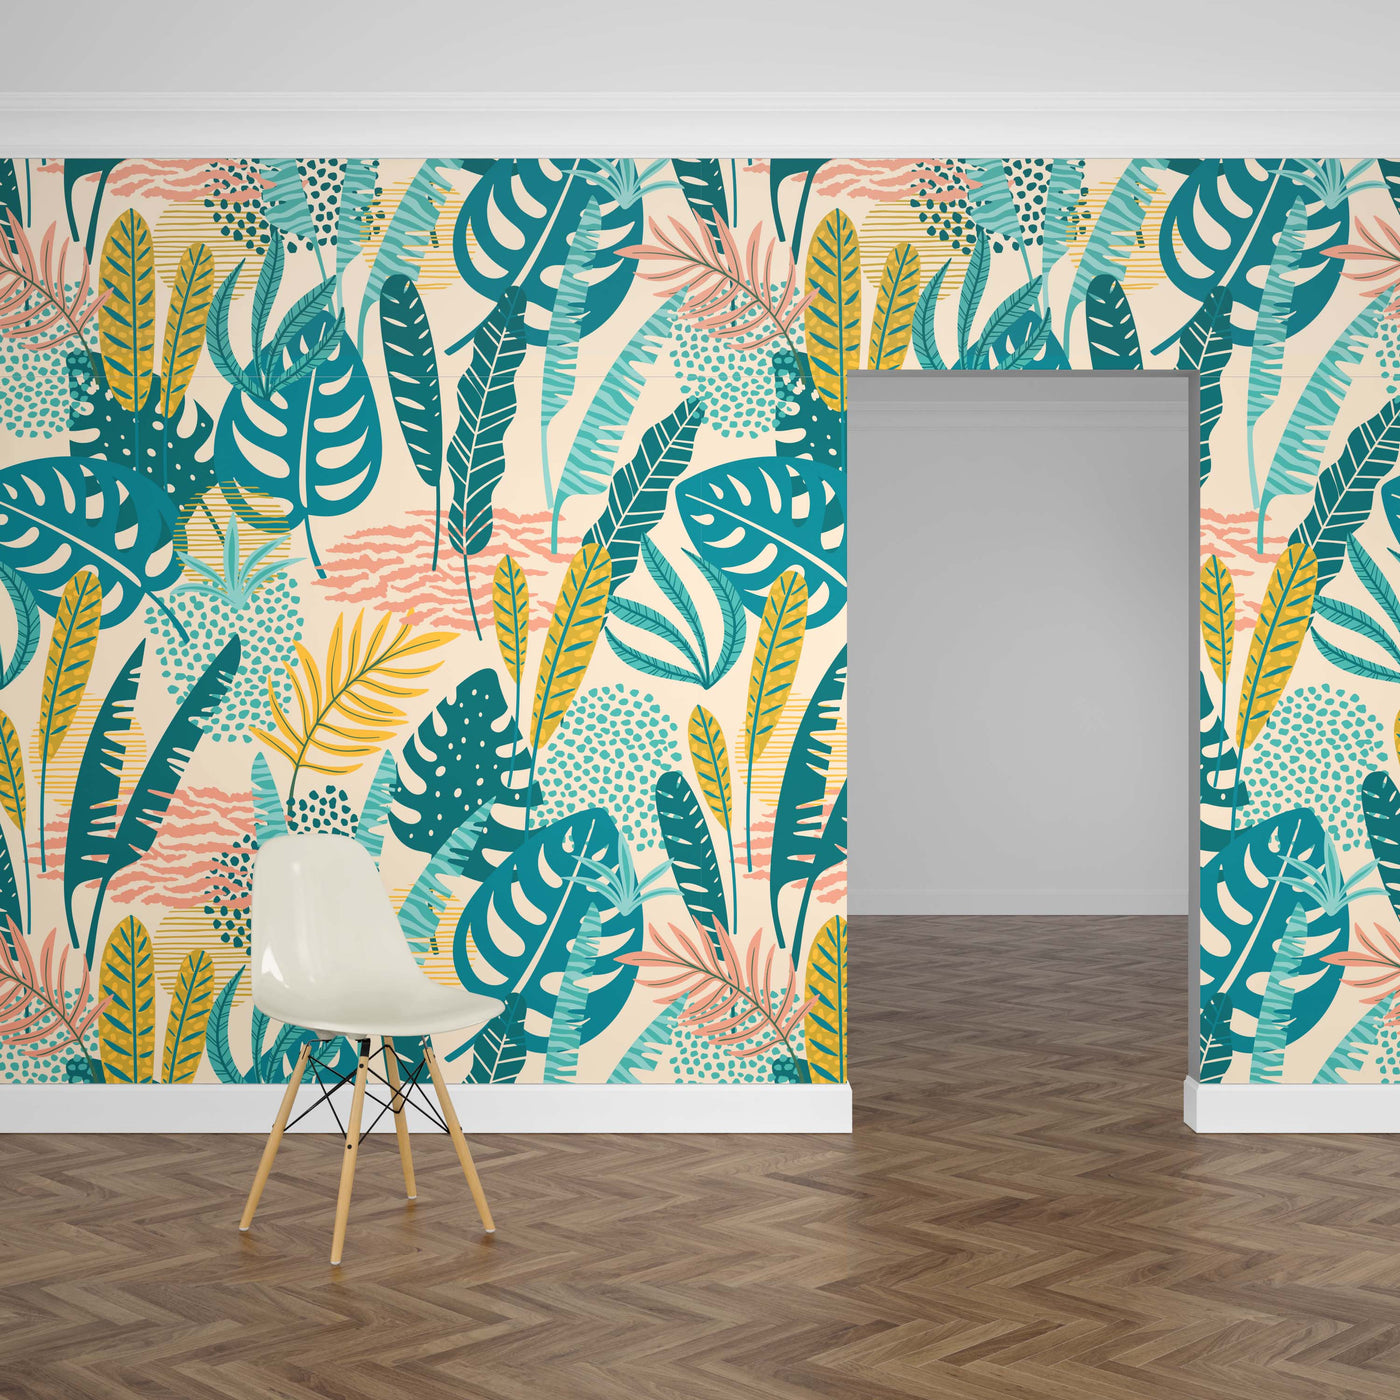 Pop Leaves Mural Wallpaper (m²)-Wall Decor-LEAF WALLPAPER, MURALS, MURALS / WALLPAPERS, NATURE WALL ART, NON-WOVEN WALLPAPER-Forest Homes-Nature inspired decor-Nature decor